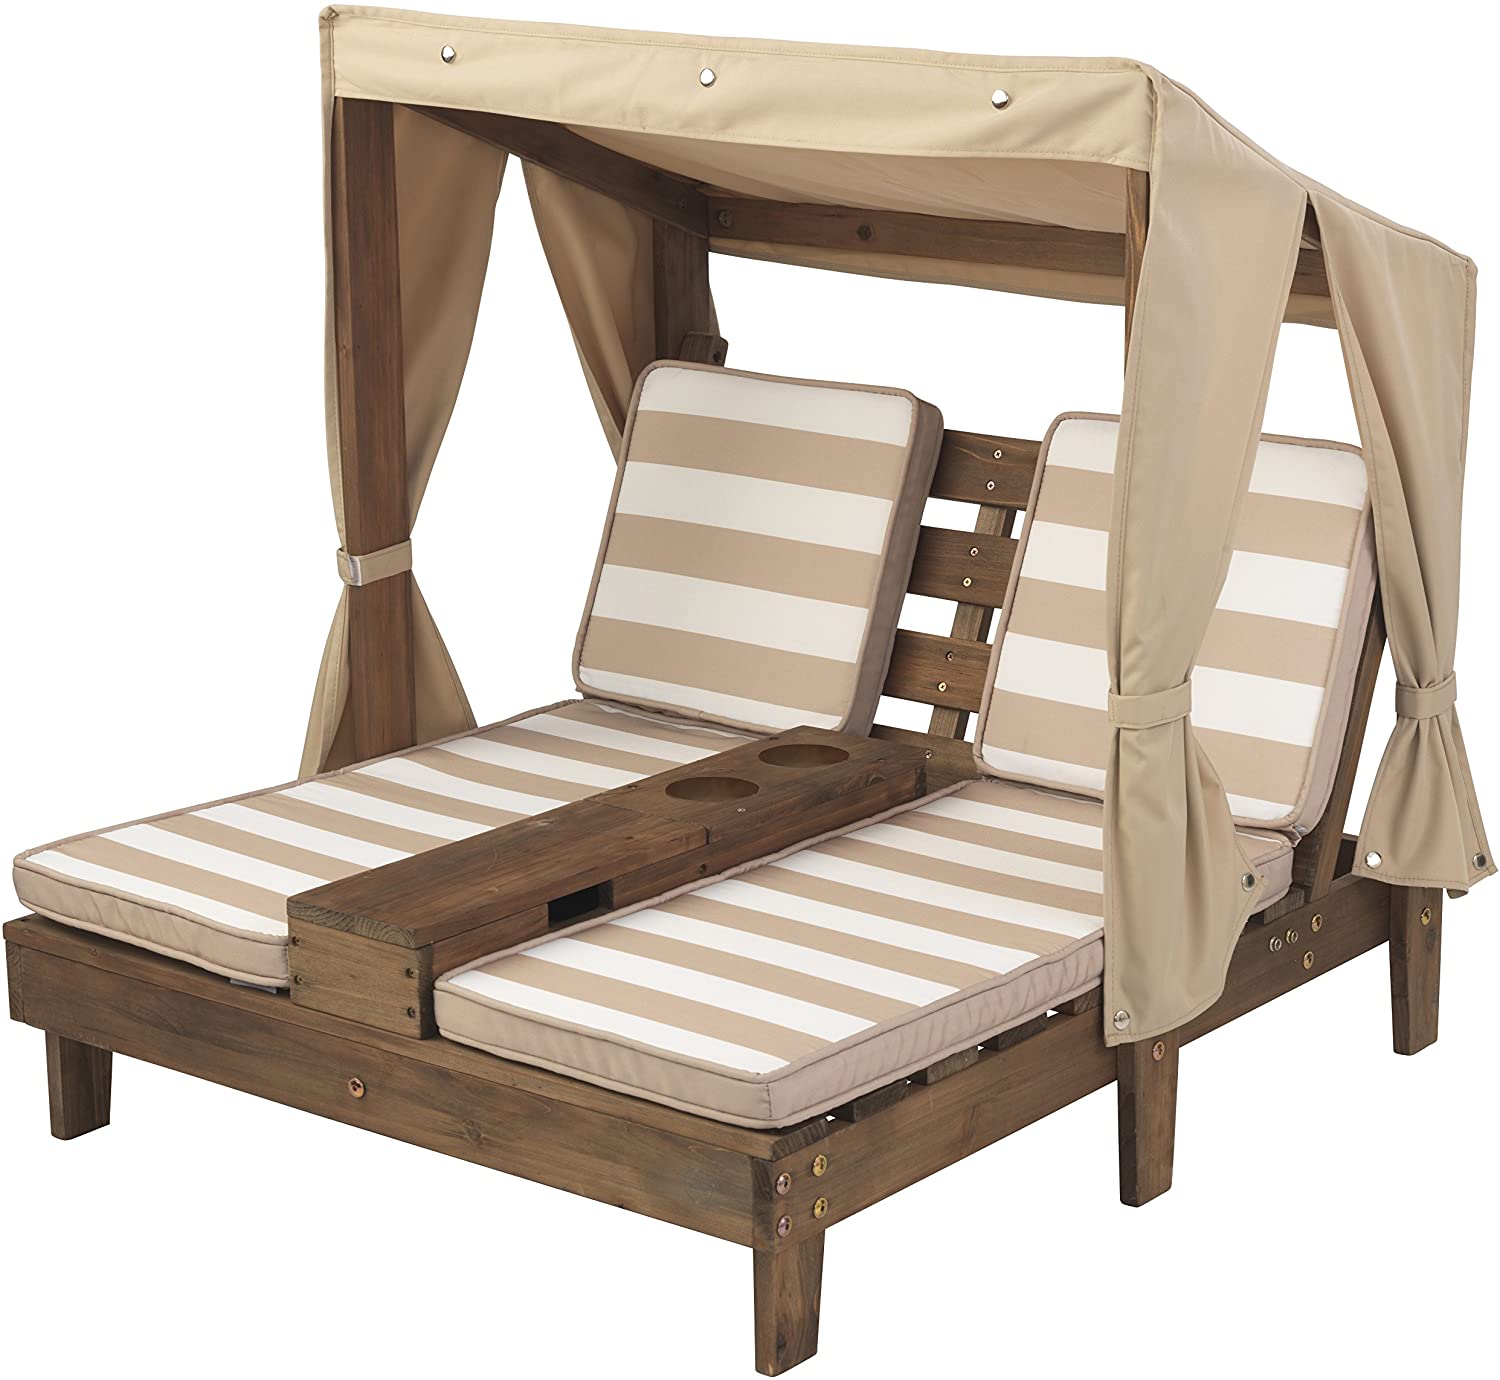 KidKraft 00534 Double Chaise Lounge Canopy Patio Chair